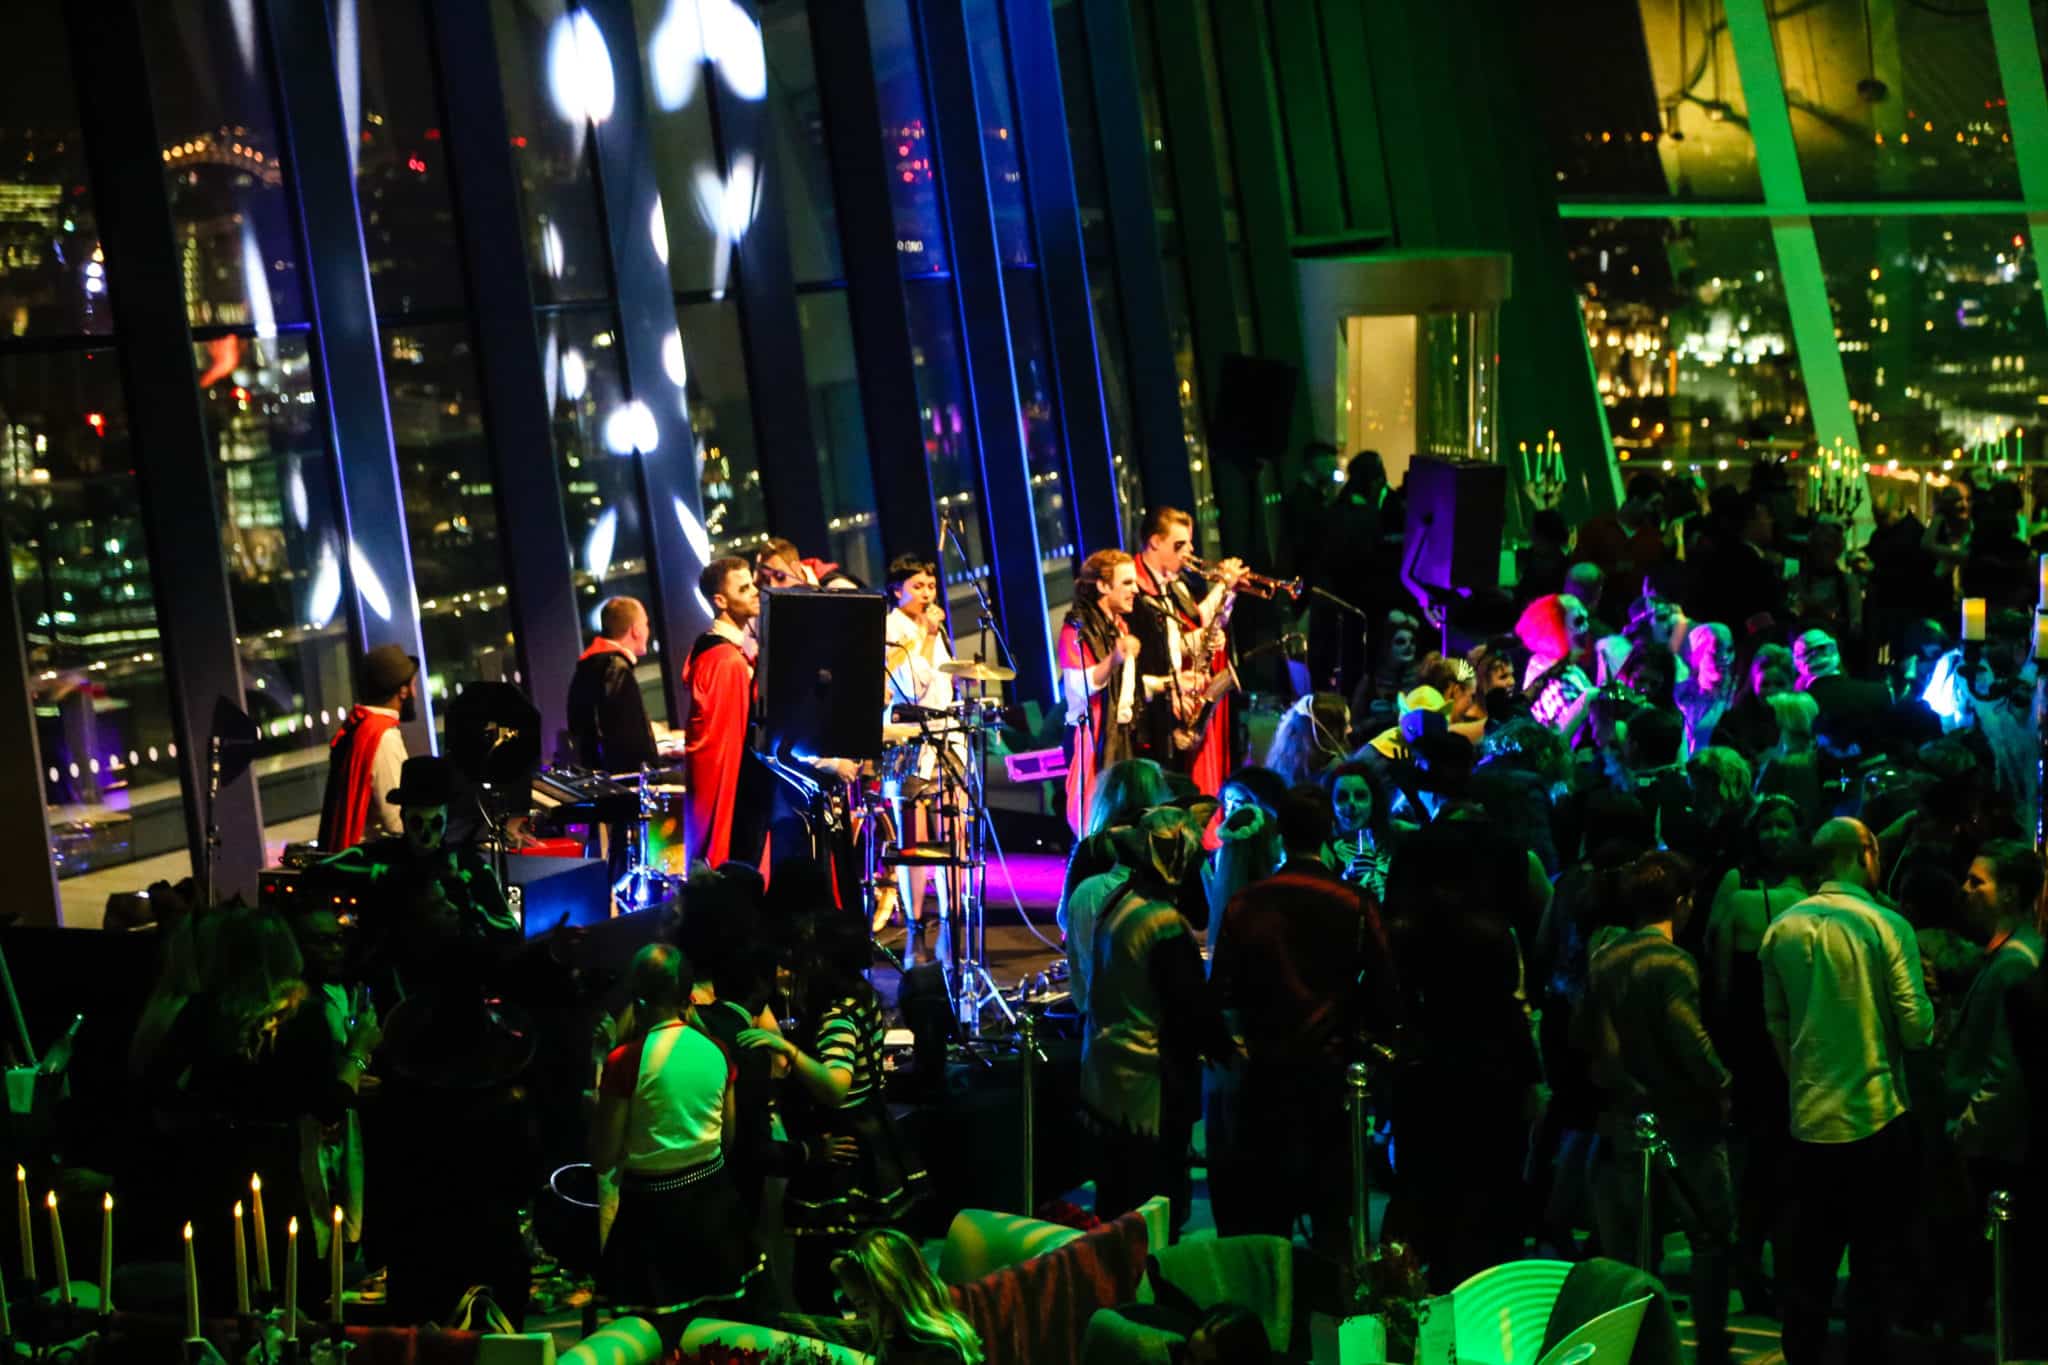 A band performing at the Sky Garden Halloween Party